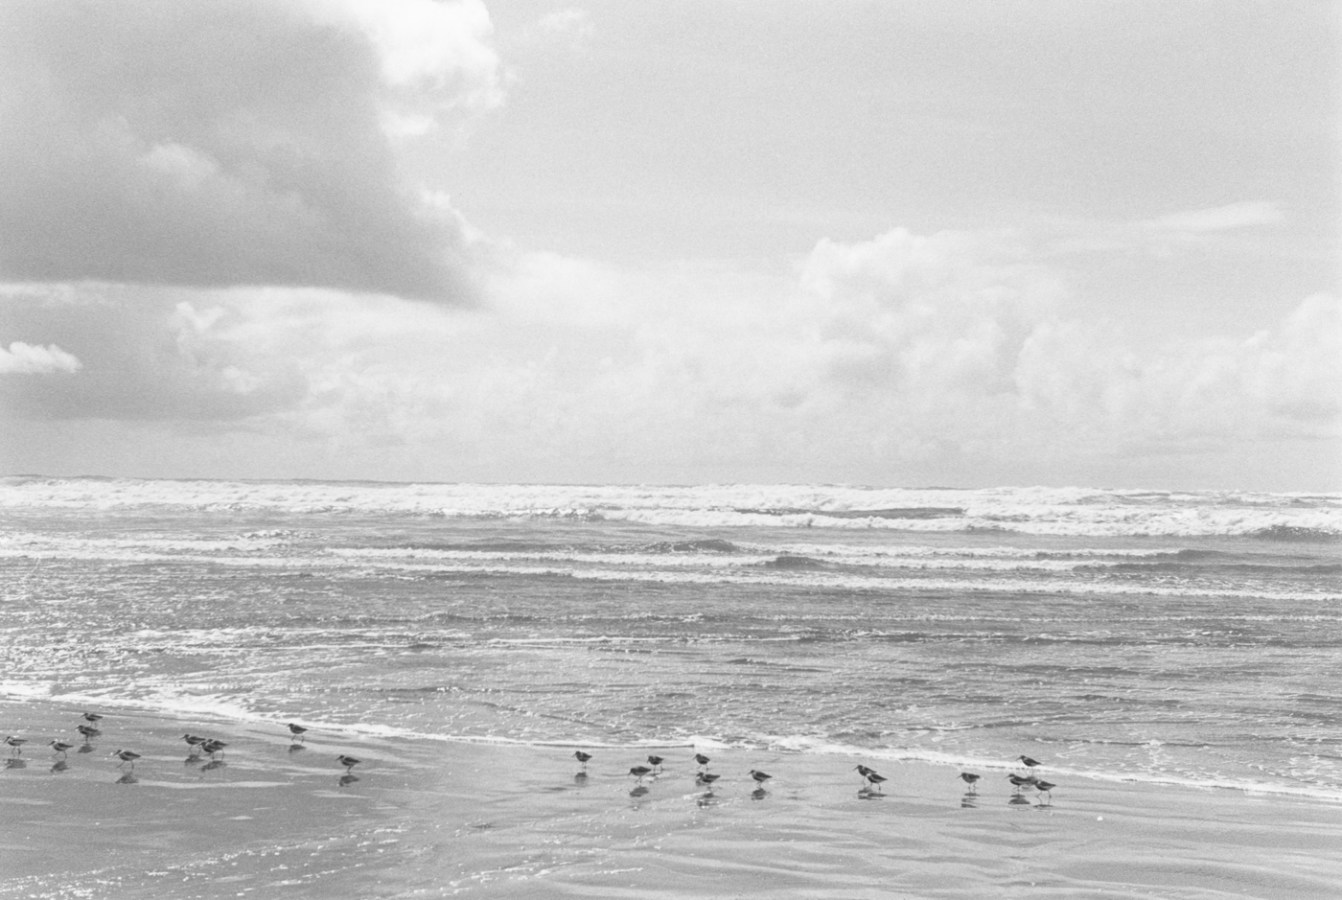 Black-and-white horizontal photograph of birds on a beach